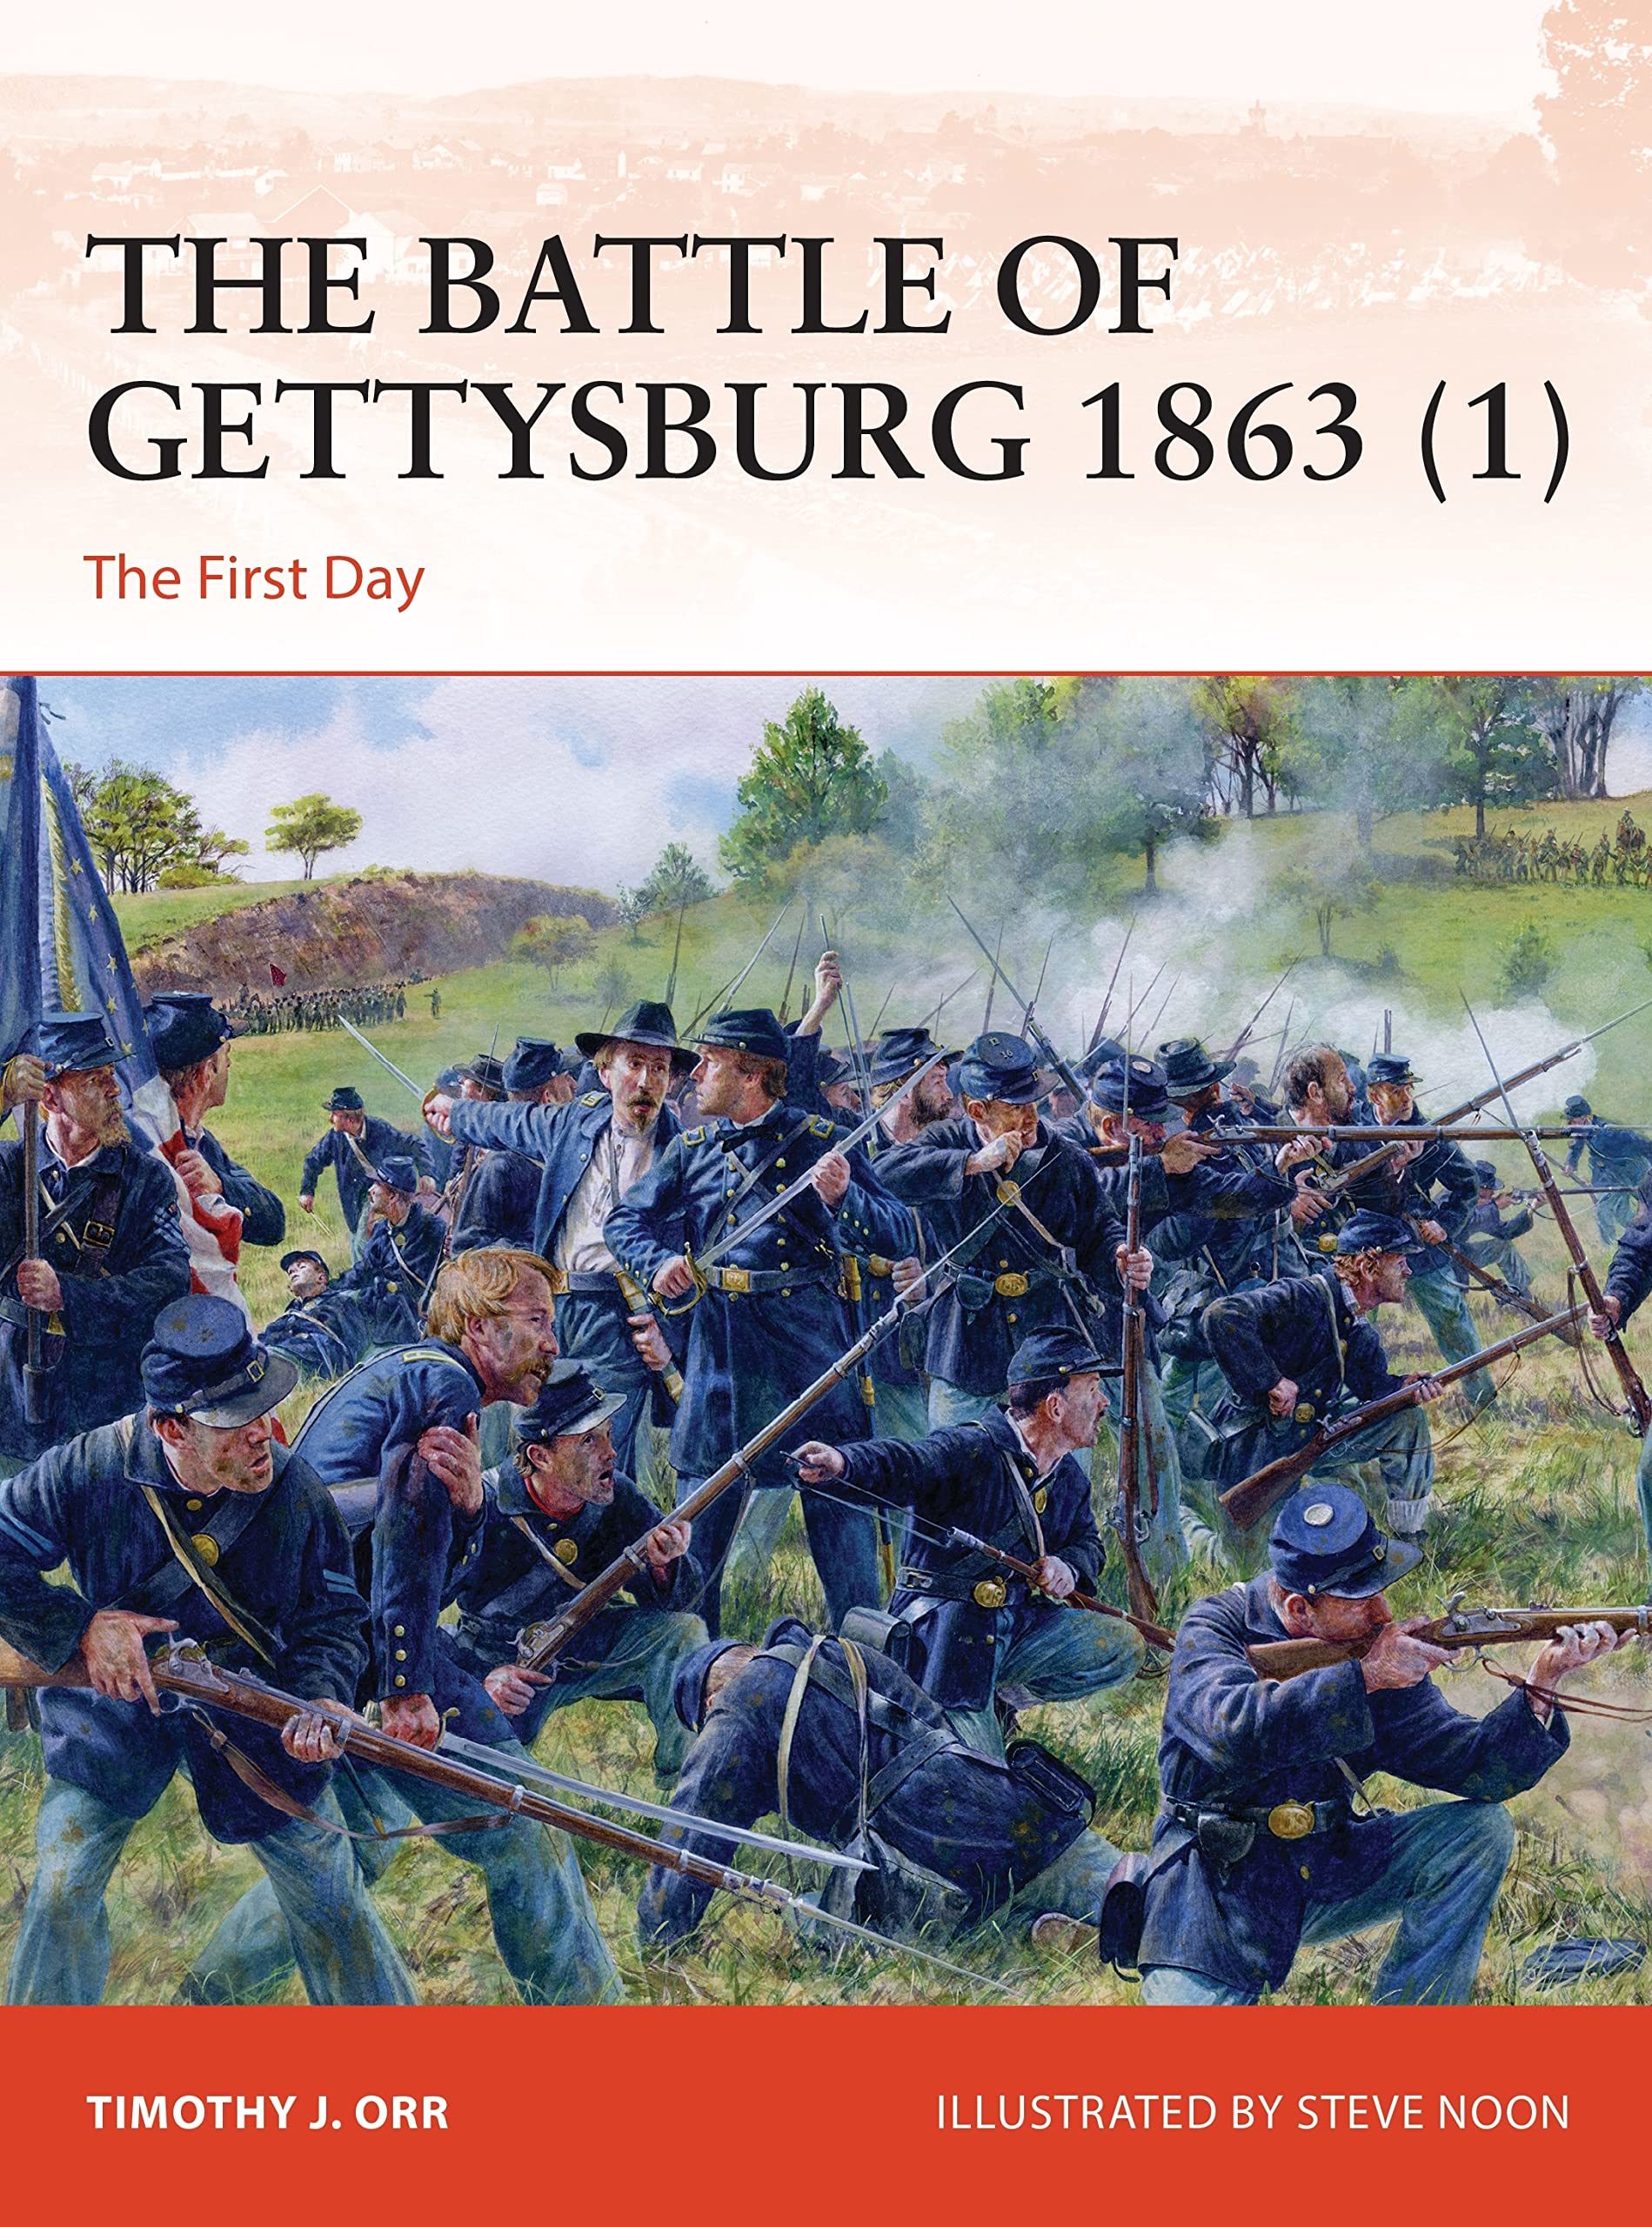 Battle of Gettysburg 1863 (1) The First Day written by Timothy J. Orr and published by Osprey Publishing